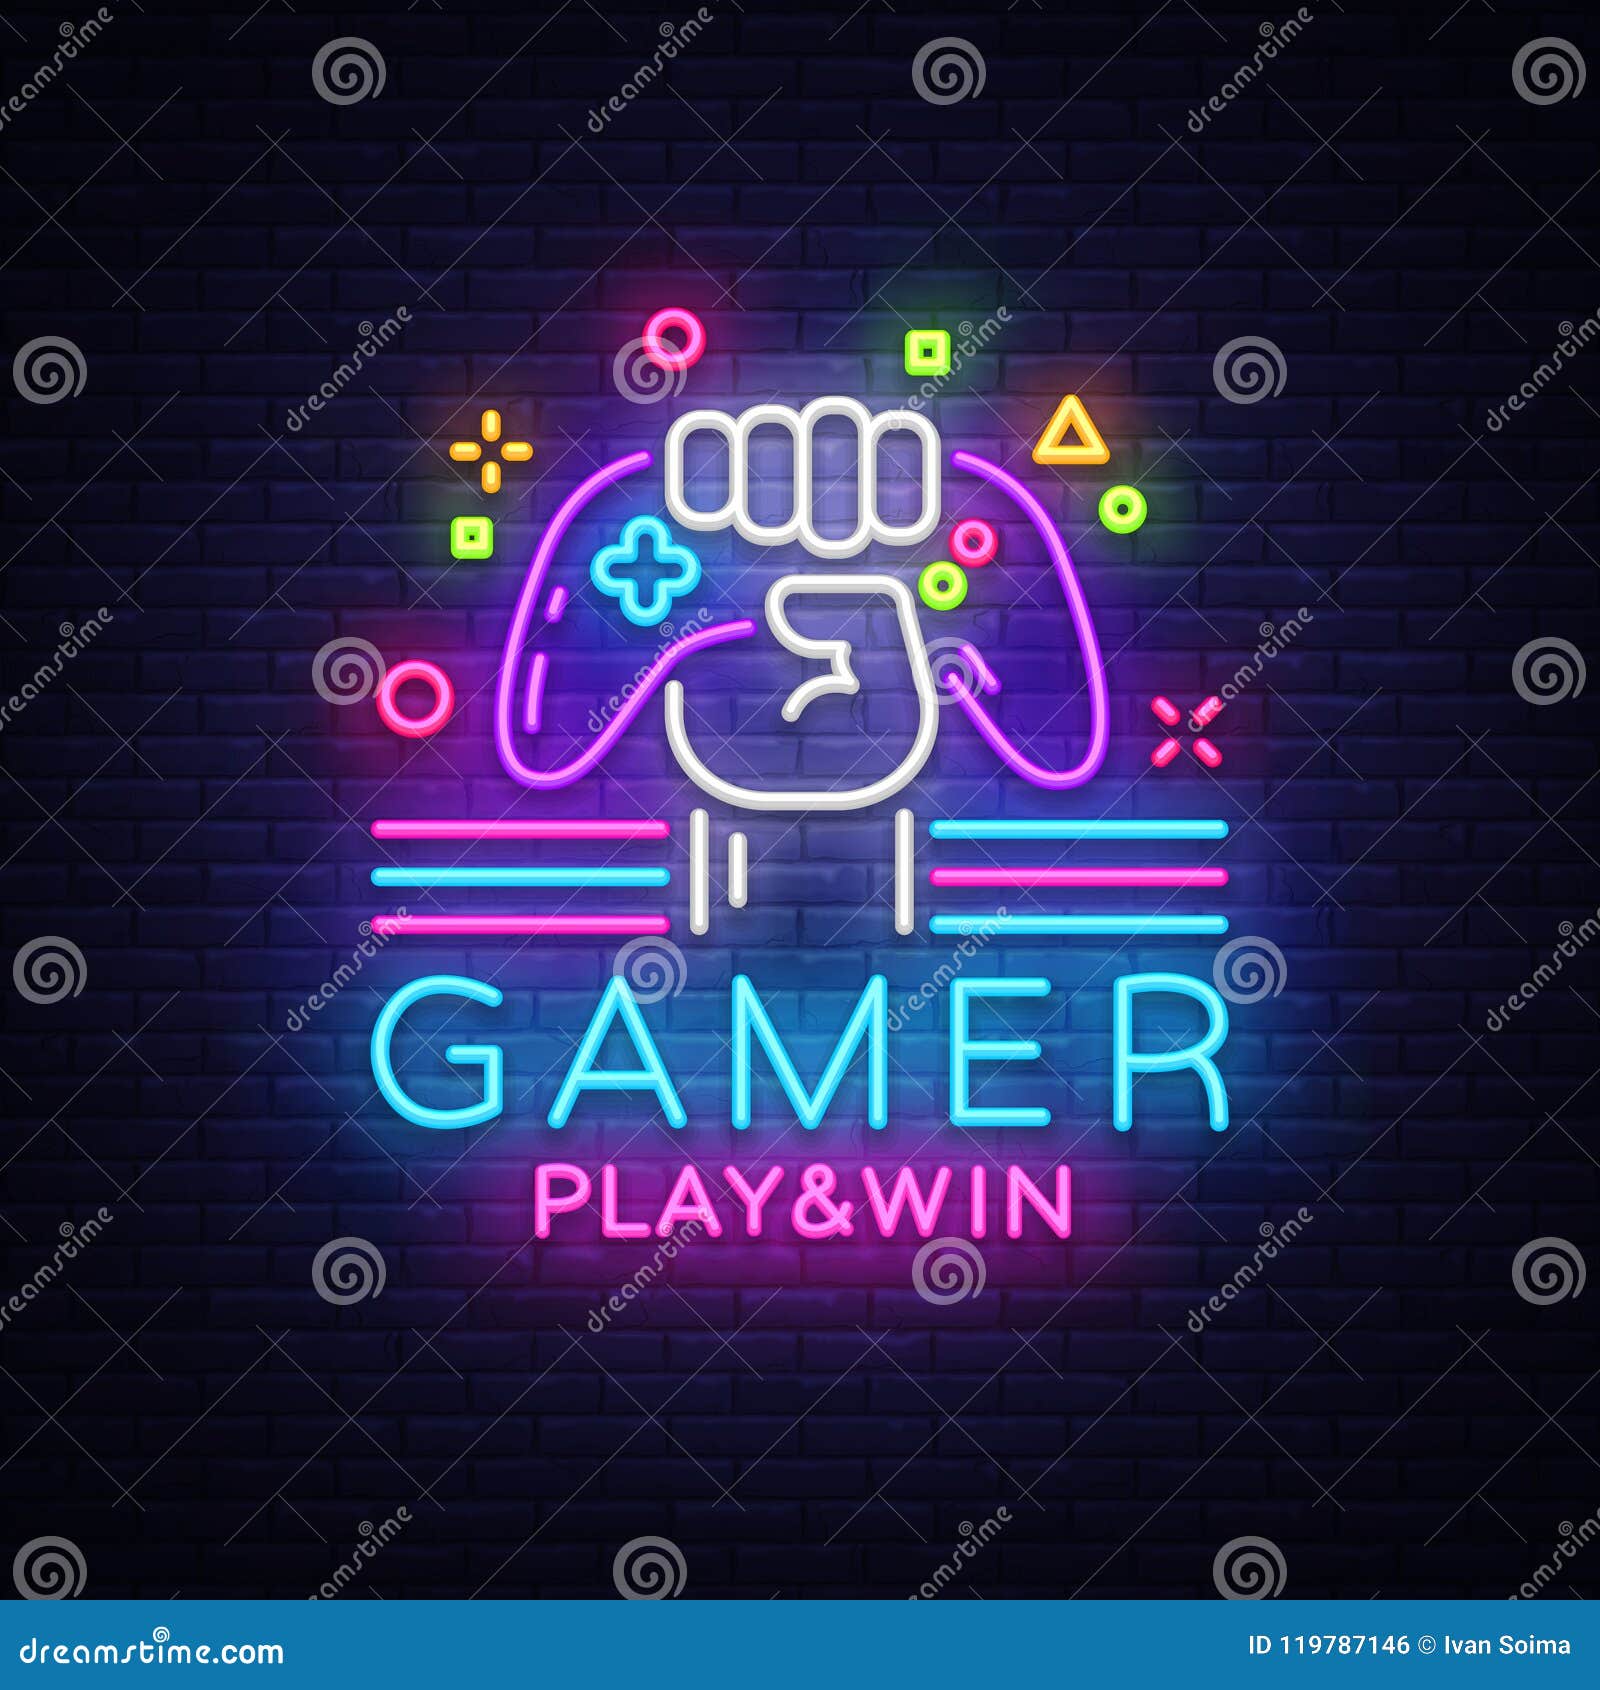 gamer play win logo neon sign  logo  template. game night logo in neon style, gamepad in hand, modern trend